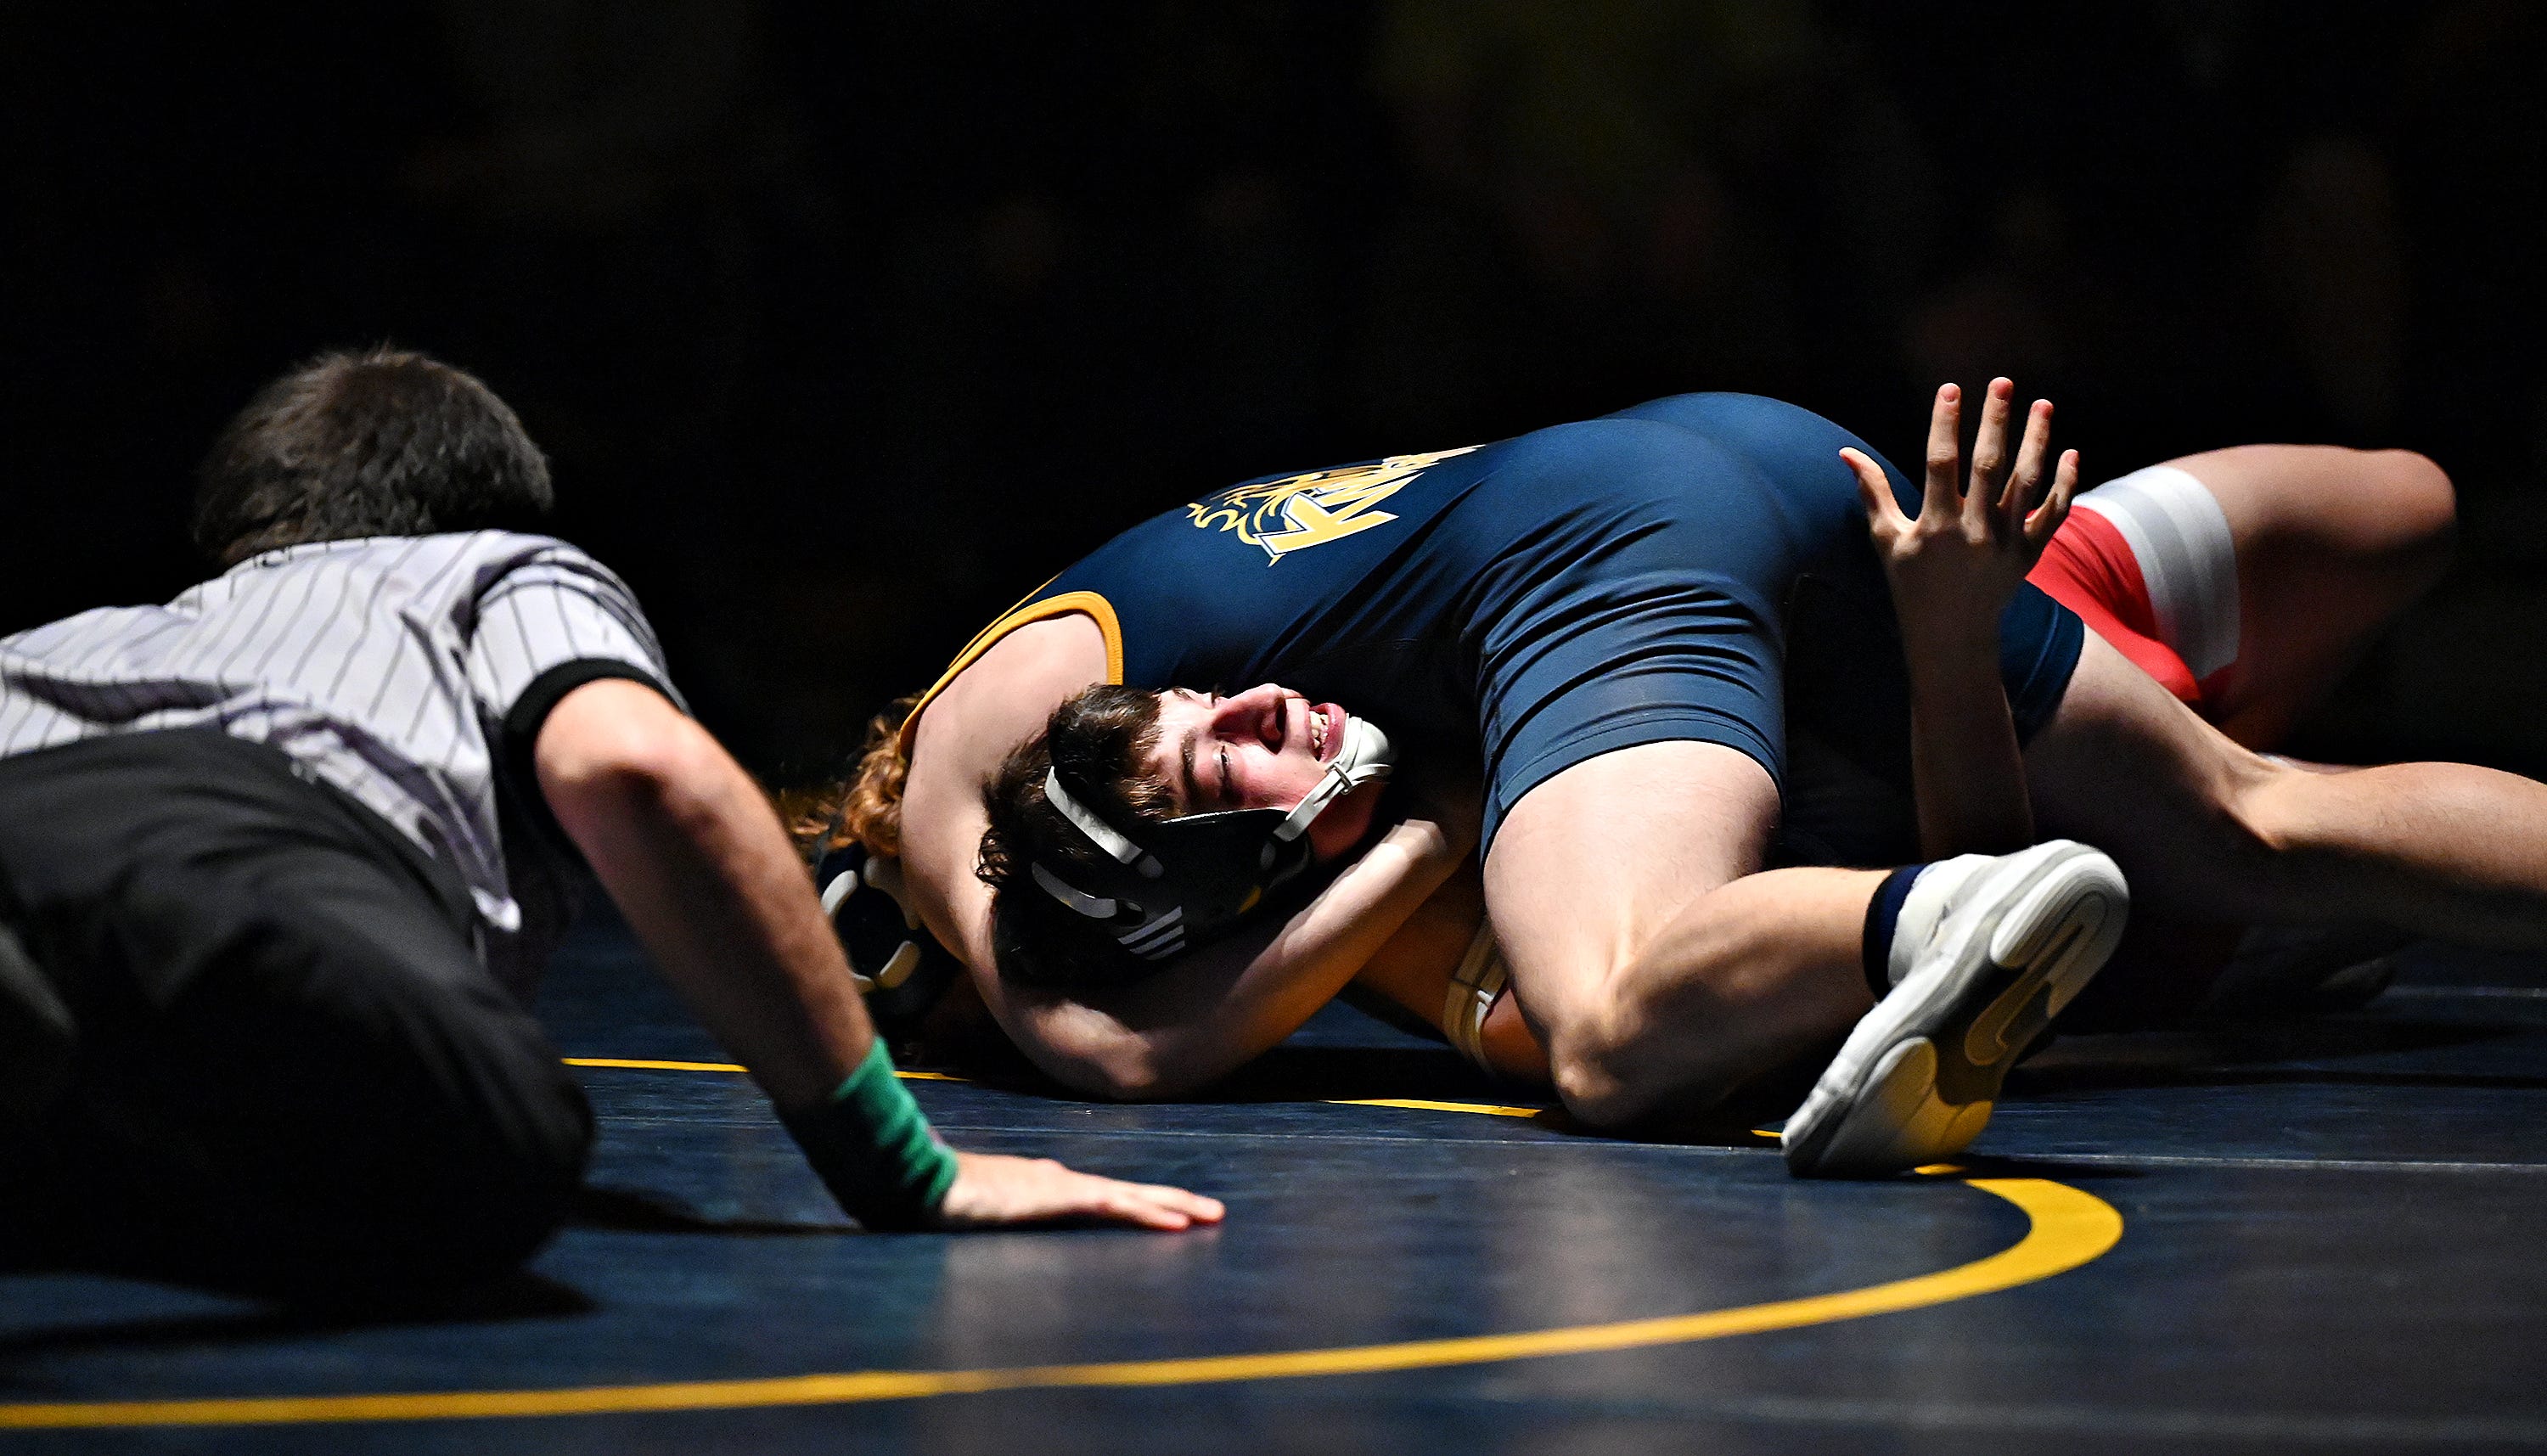 Eastern York’s Sam Myers, top, and Hamburg’s Holden Gesicki compete in the 160-pound weight class during PIAA District 3, Class 2-A first round wrestling action at Eastern York High School in Lower Windsor Township, Monday, Jan. 30, 2023. Myers would win the match and Eastern York would win the meet 50-22. Dawn J. Sagert photo